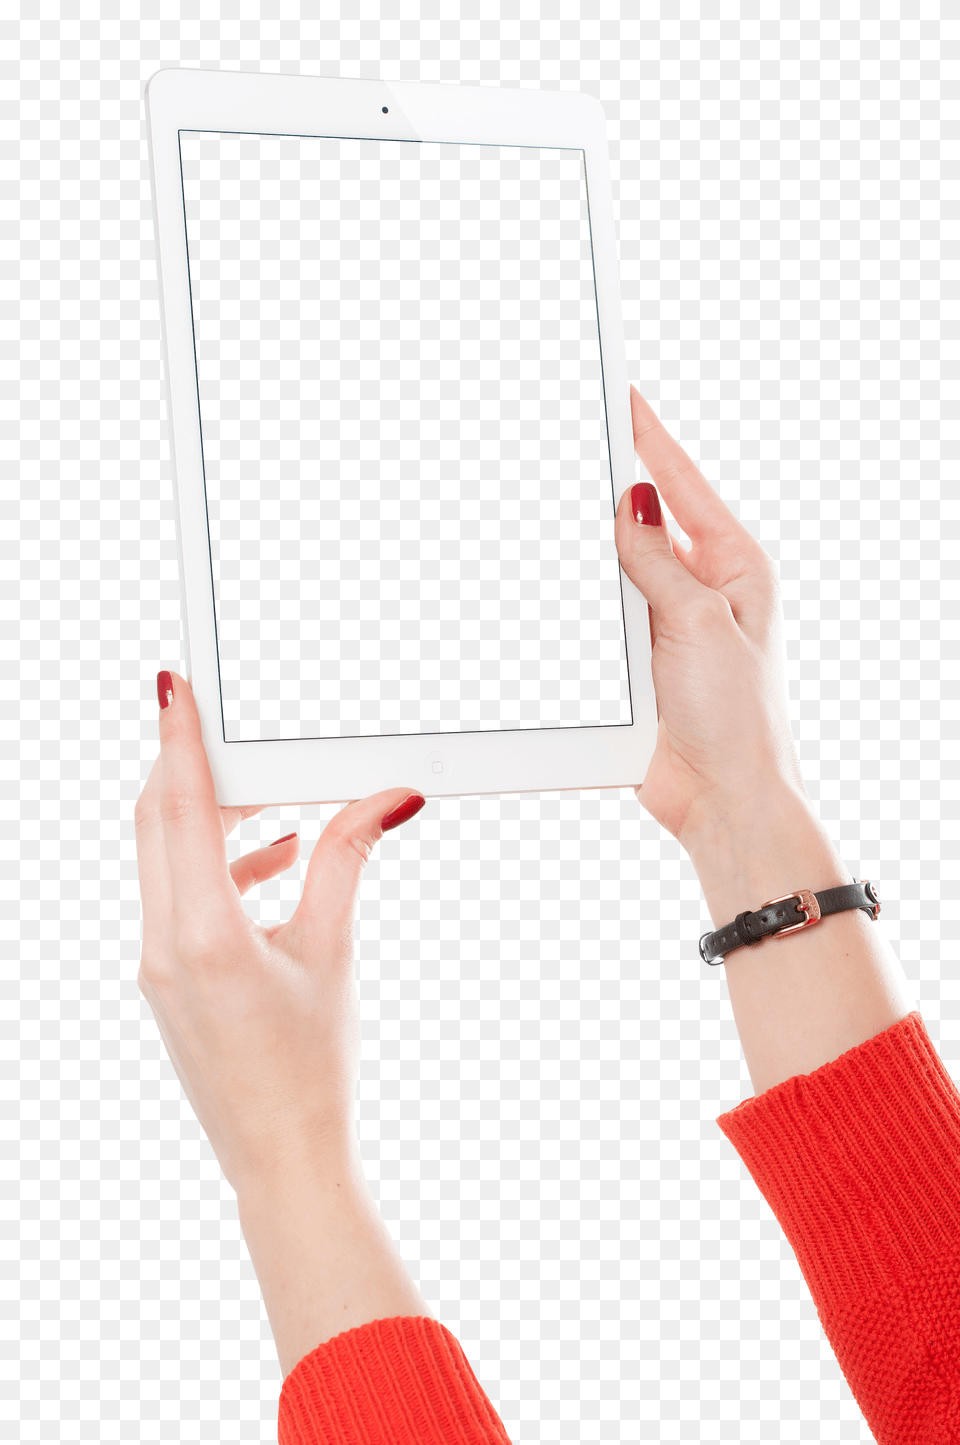 Pngpix Com Girl Hand Holding White Tablet Image, Accessories, White Board, Bracelet, Jewelry Png